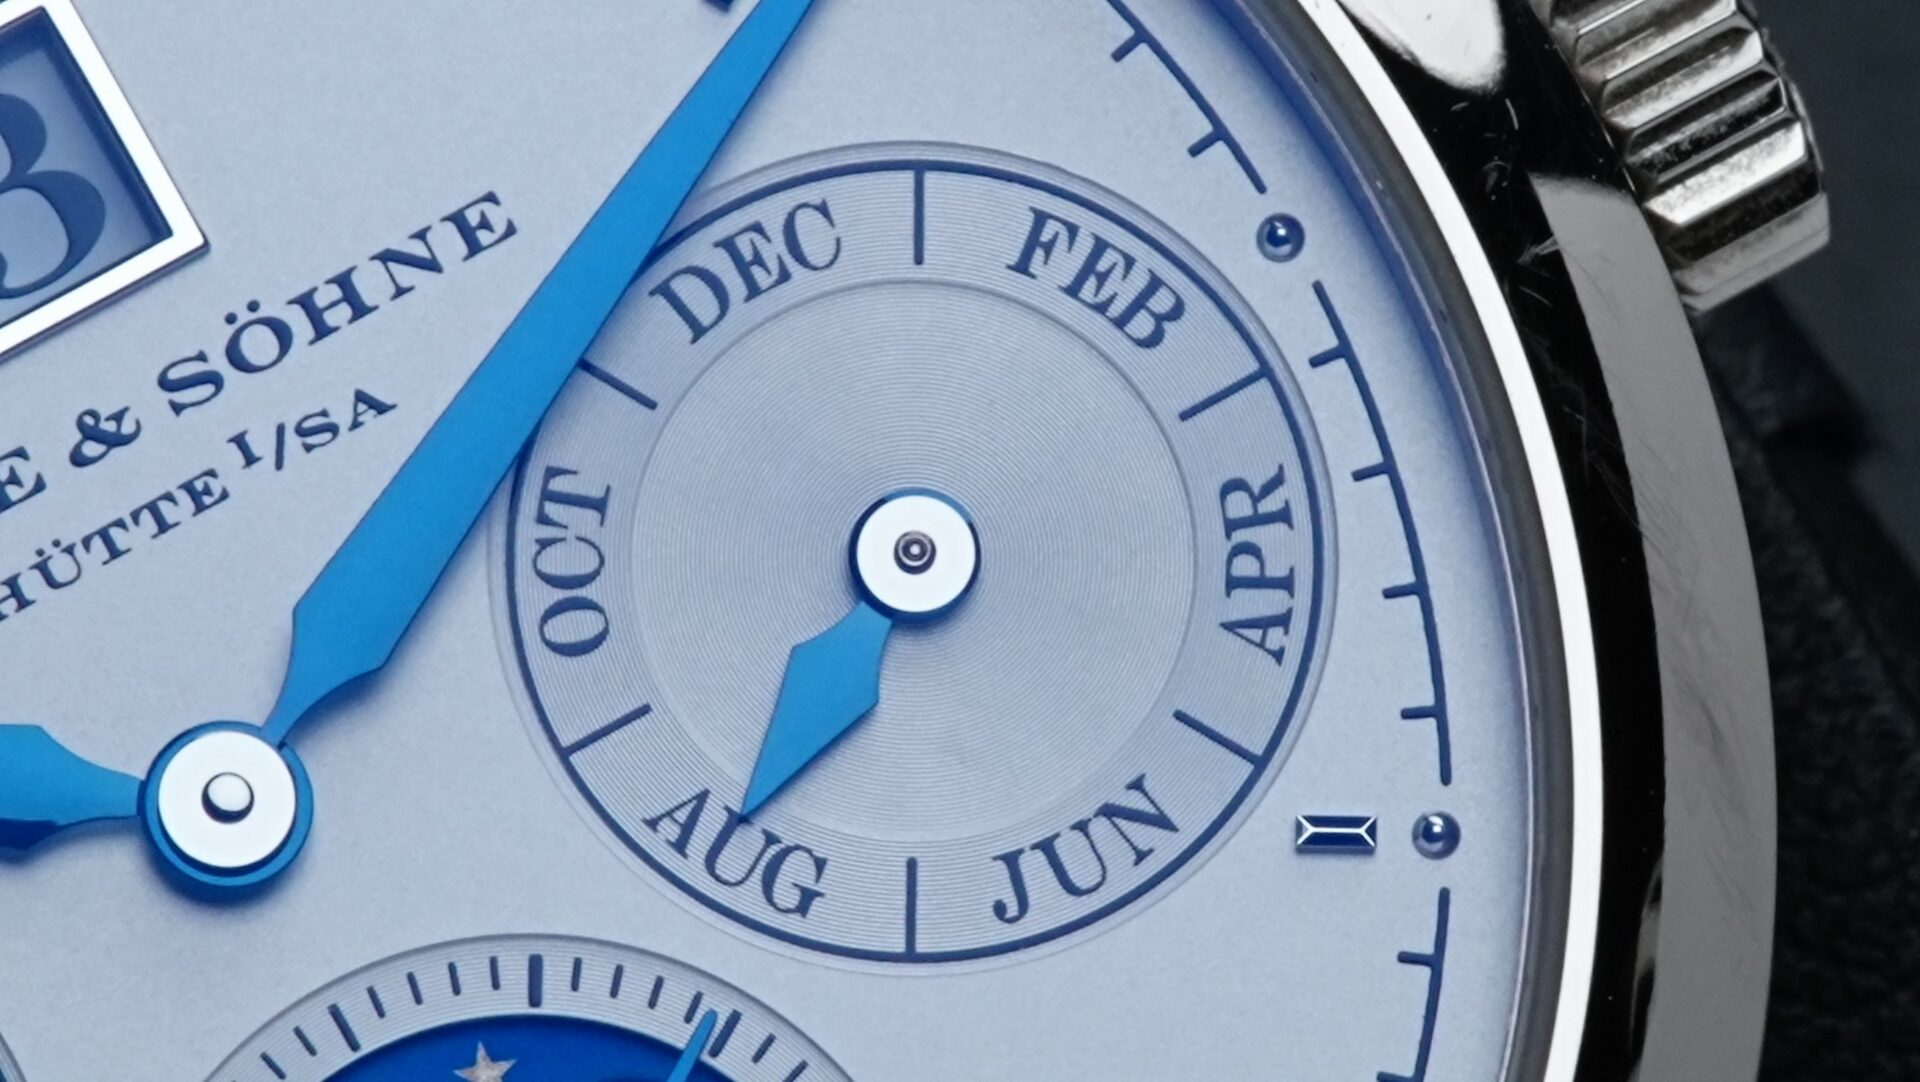 Macro shot of the dial on the A. Lange & Söhne Saxonia Annual Calendar watch.